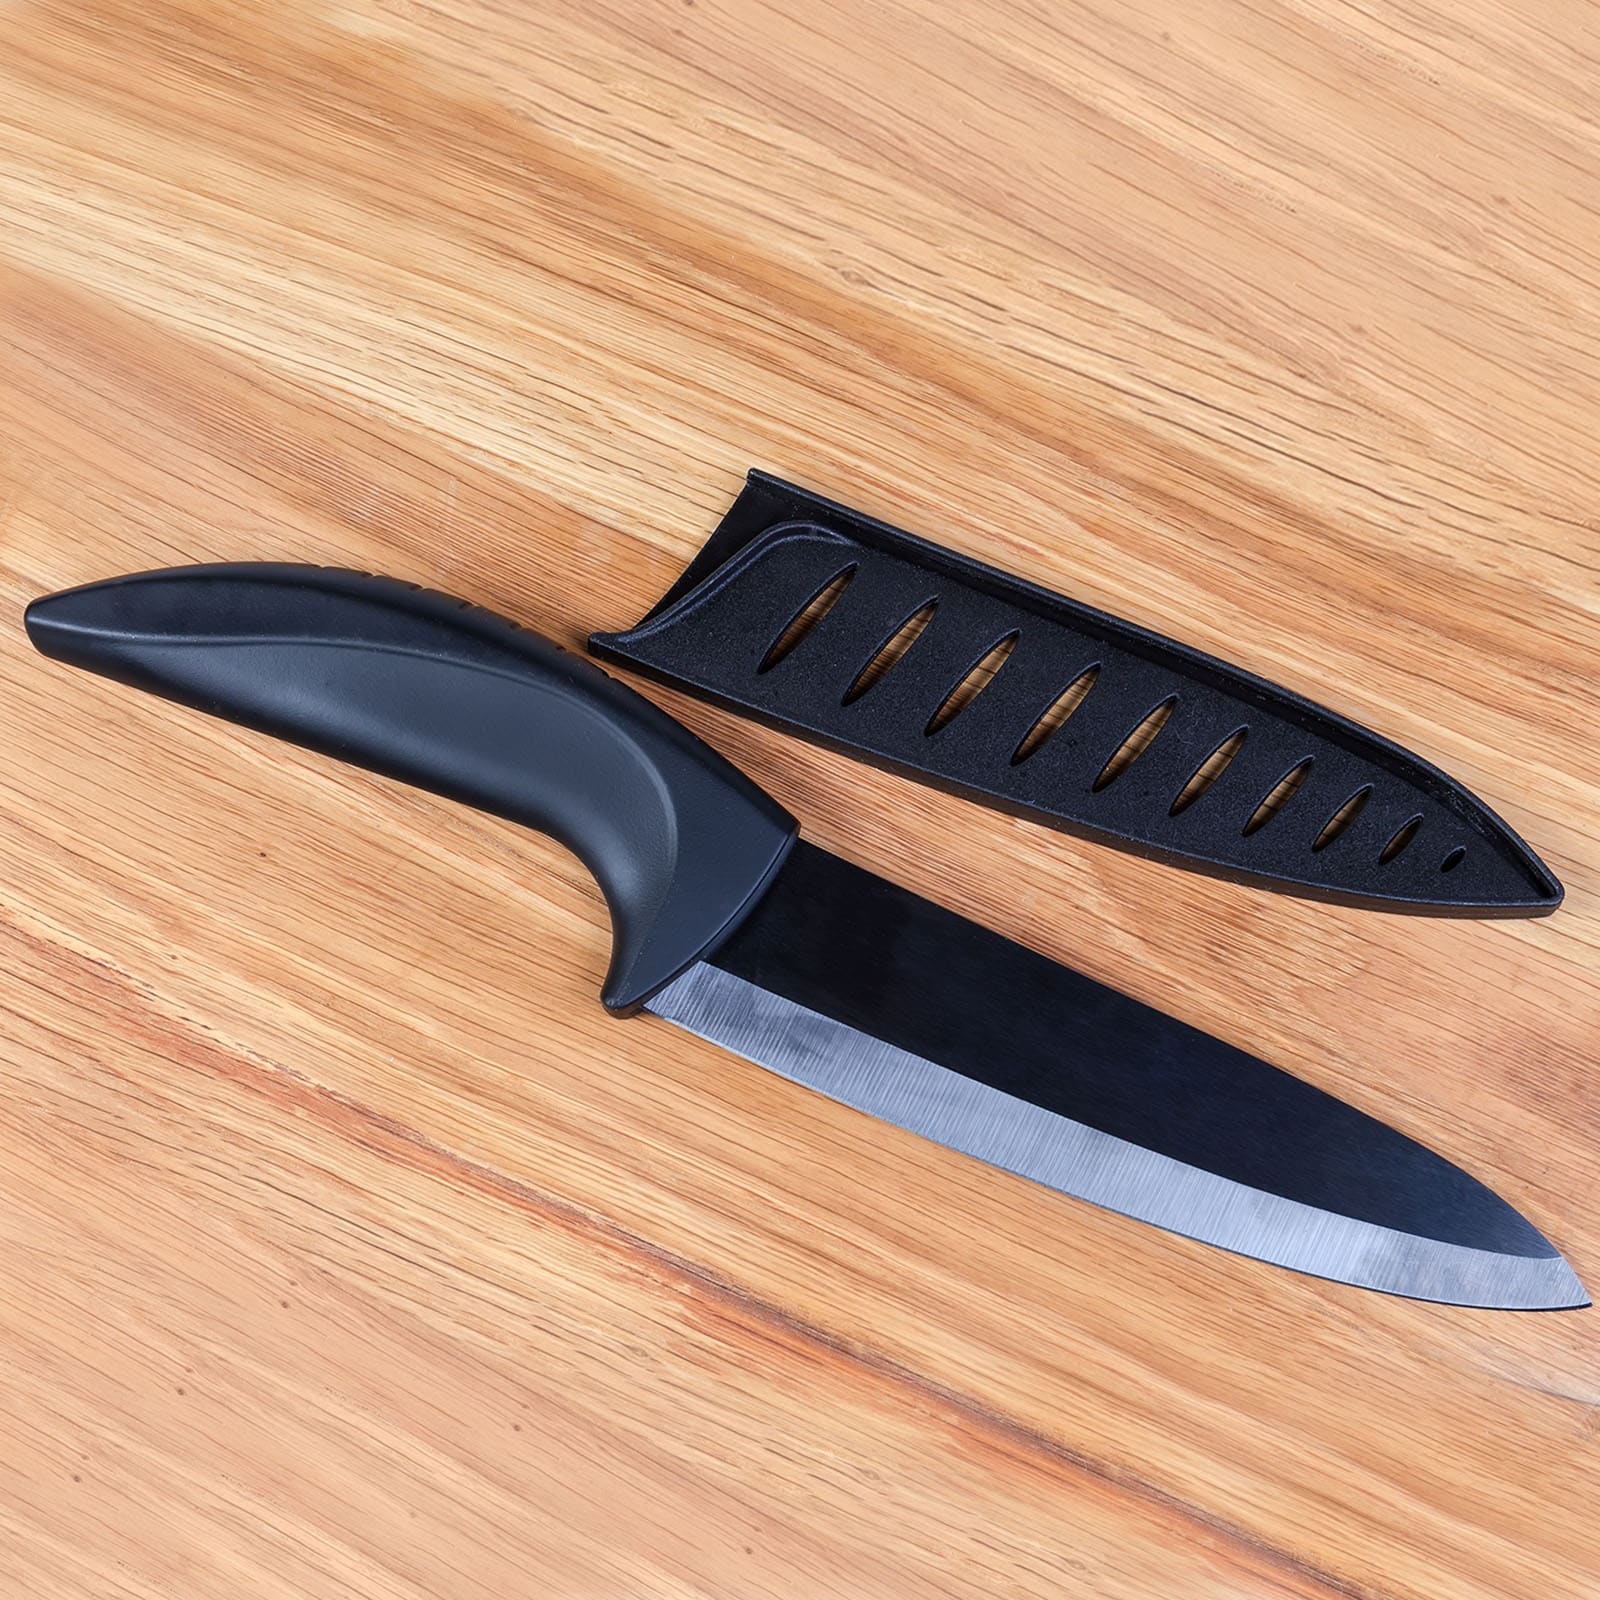 https://ak1.ostkcdn.com/images/products/is/images/direct/dfcd1d3abb09f54b06f6b4c9420c5139c638a17c/2Pcs-Plastic-Kitchen-Knife-Sheath-Cover-Sleeves-for-8%22-Carving-Knife.jpg